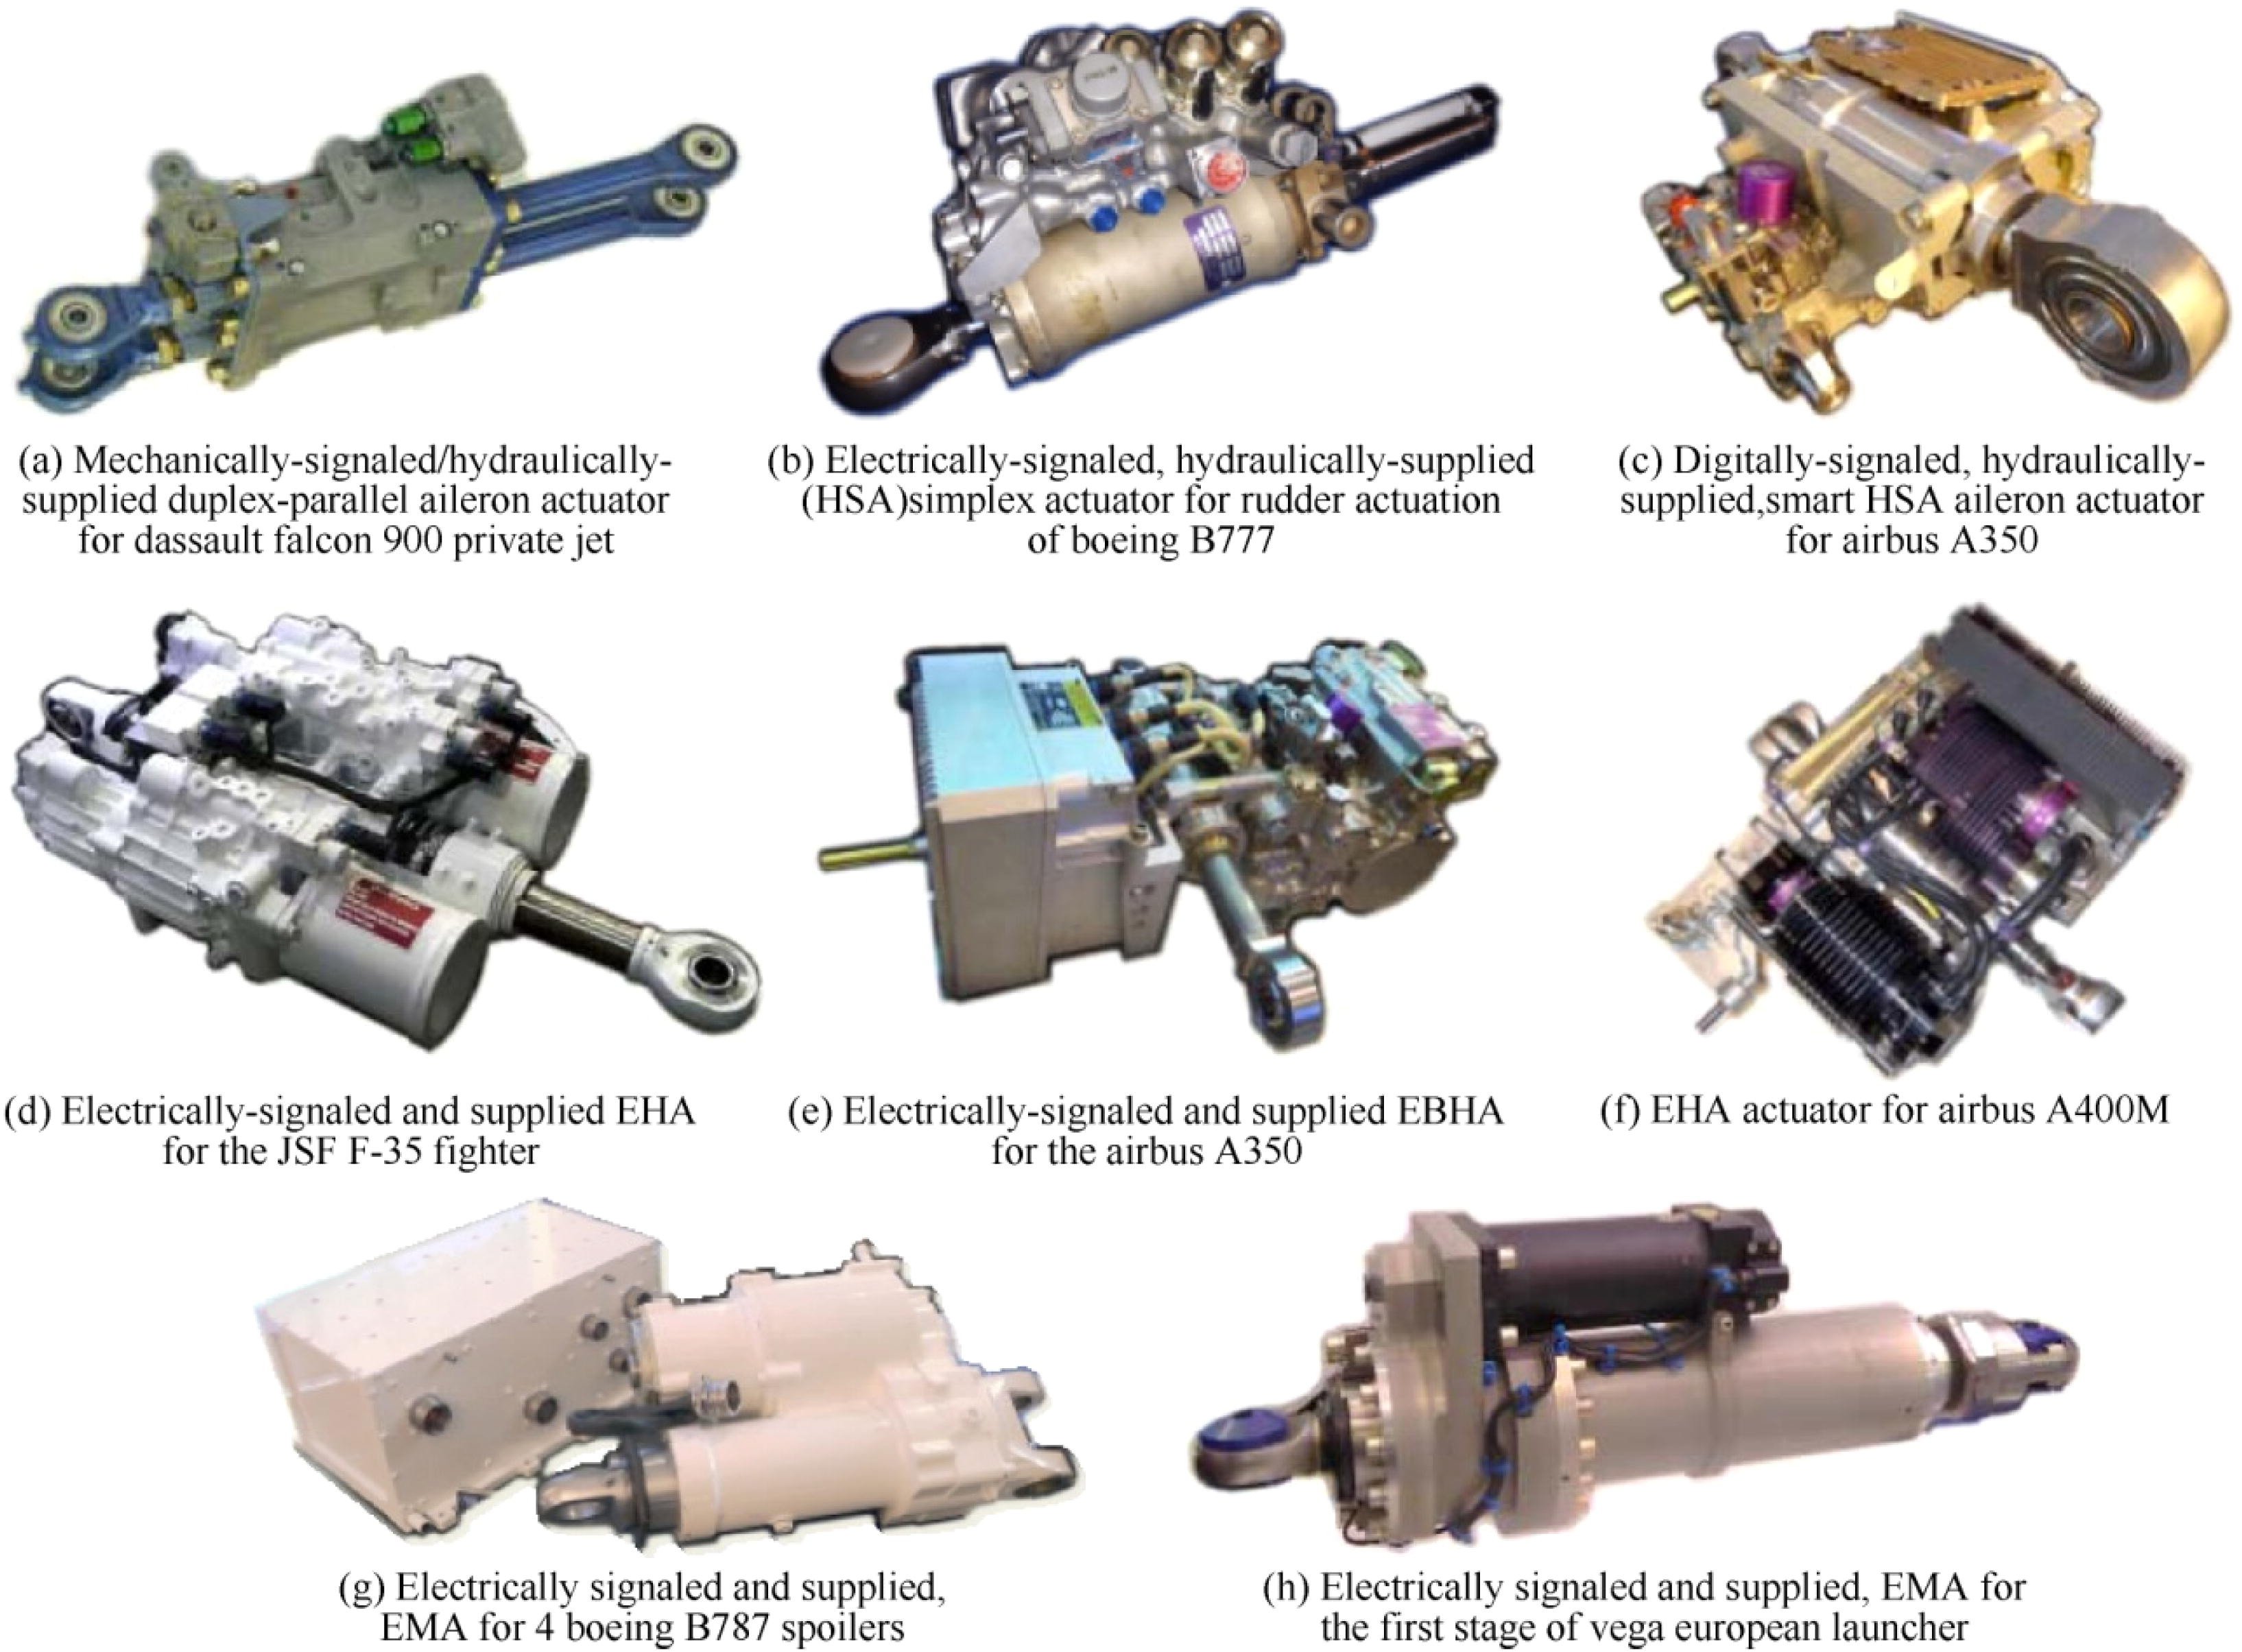 A selection of hydromechanical, electrohydraulic, electrohydrostatic and electromechanical actuators used on commercial and military aircraft and the European Vega rocket launch system illustrating the progression of aerospace actuation technologies toward all-electric actuation. Source: Maré & Fu. Review on signal-by-wire and power-by-wire actuation for more electric aircraft. (Click image to enlarge)